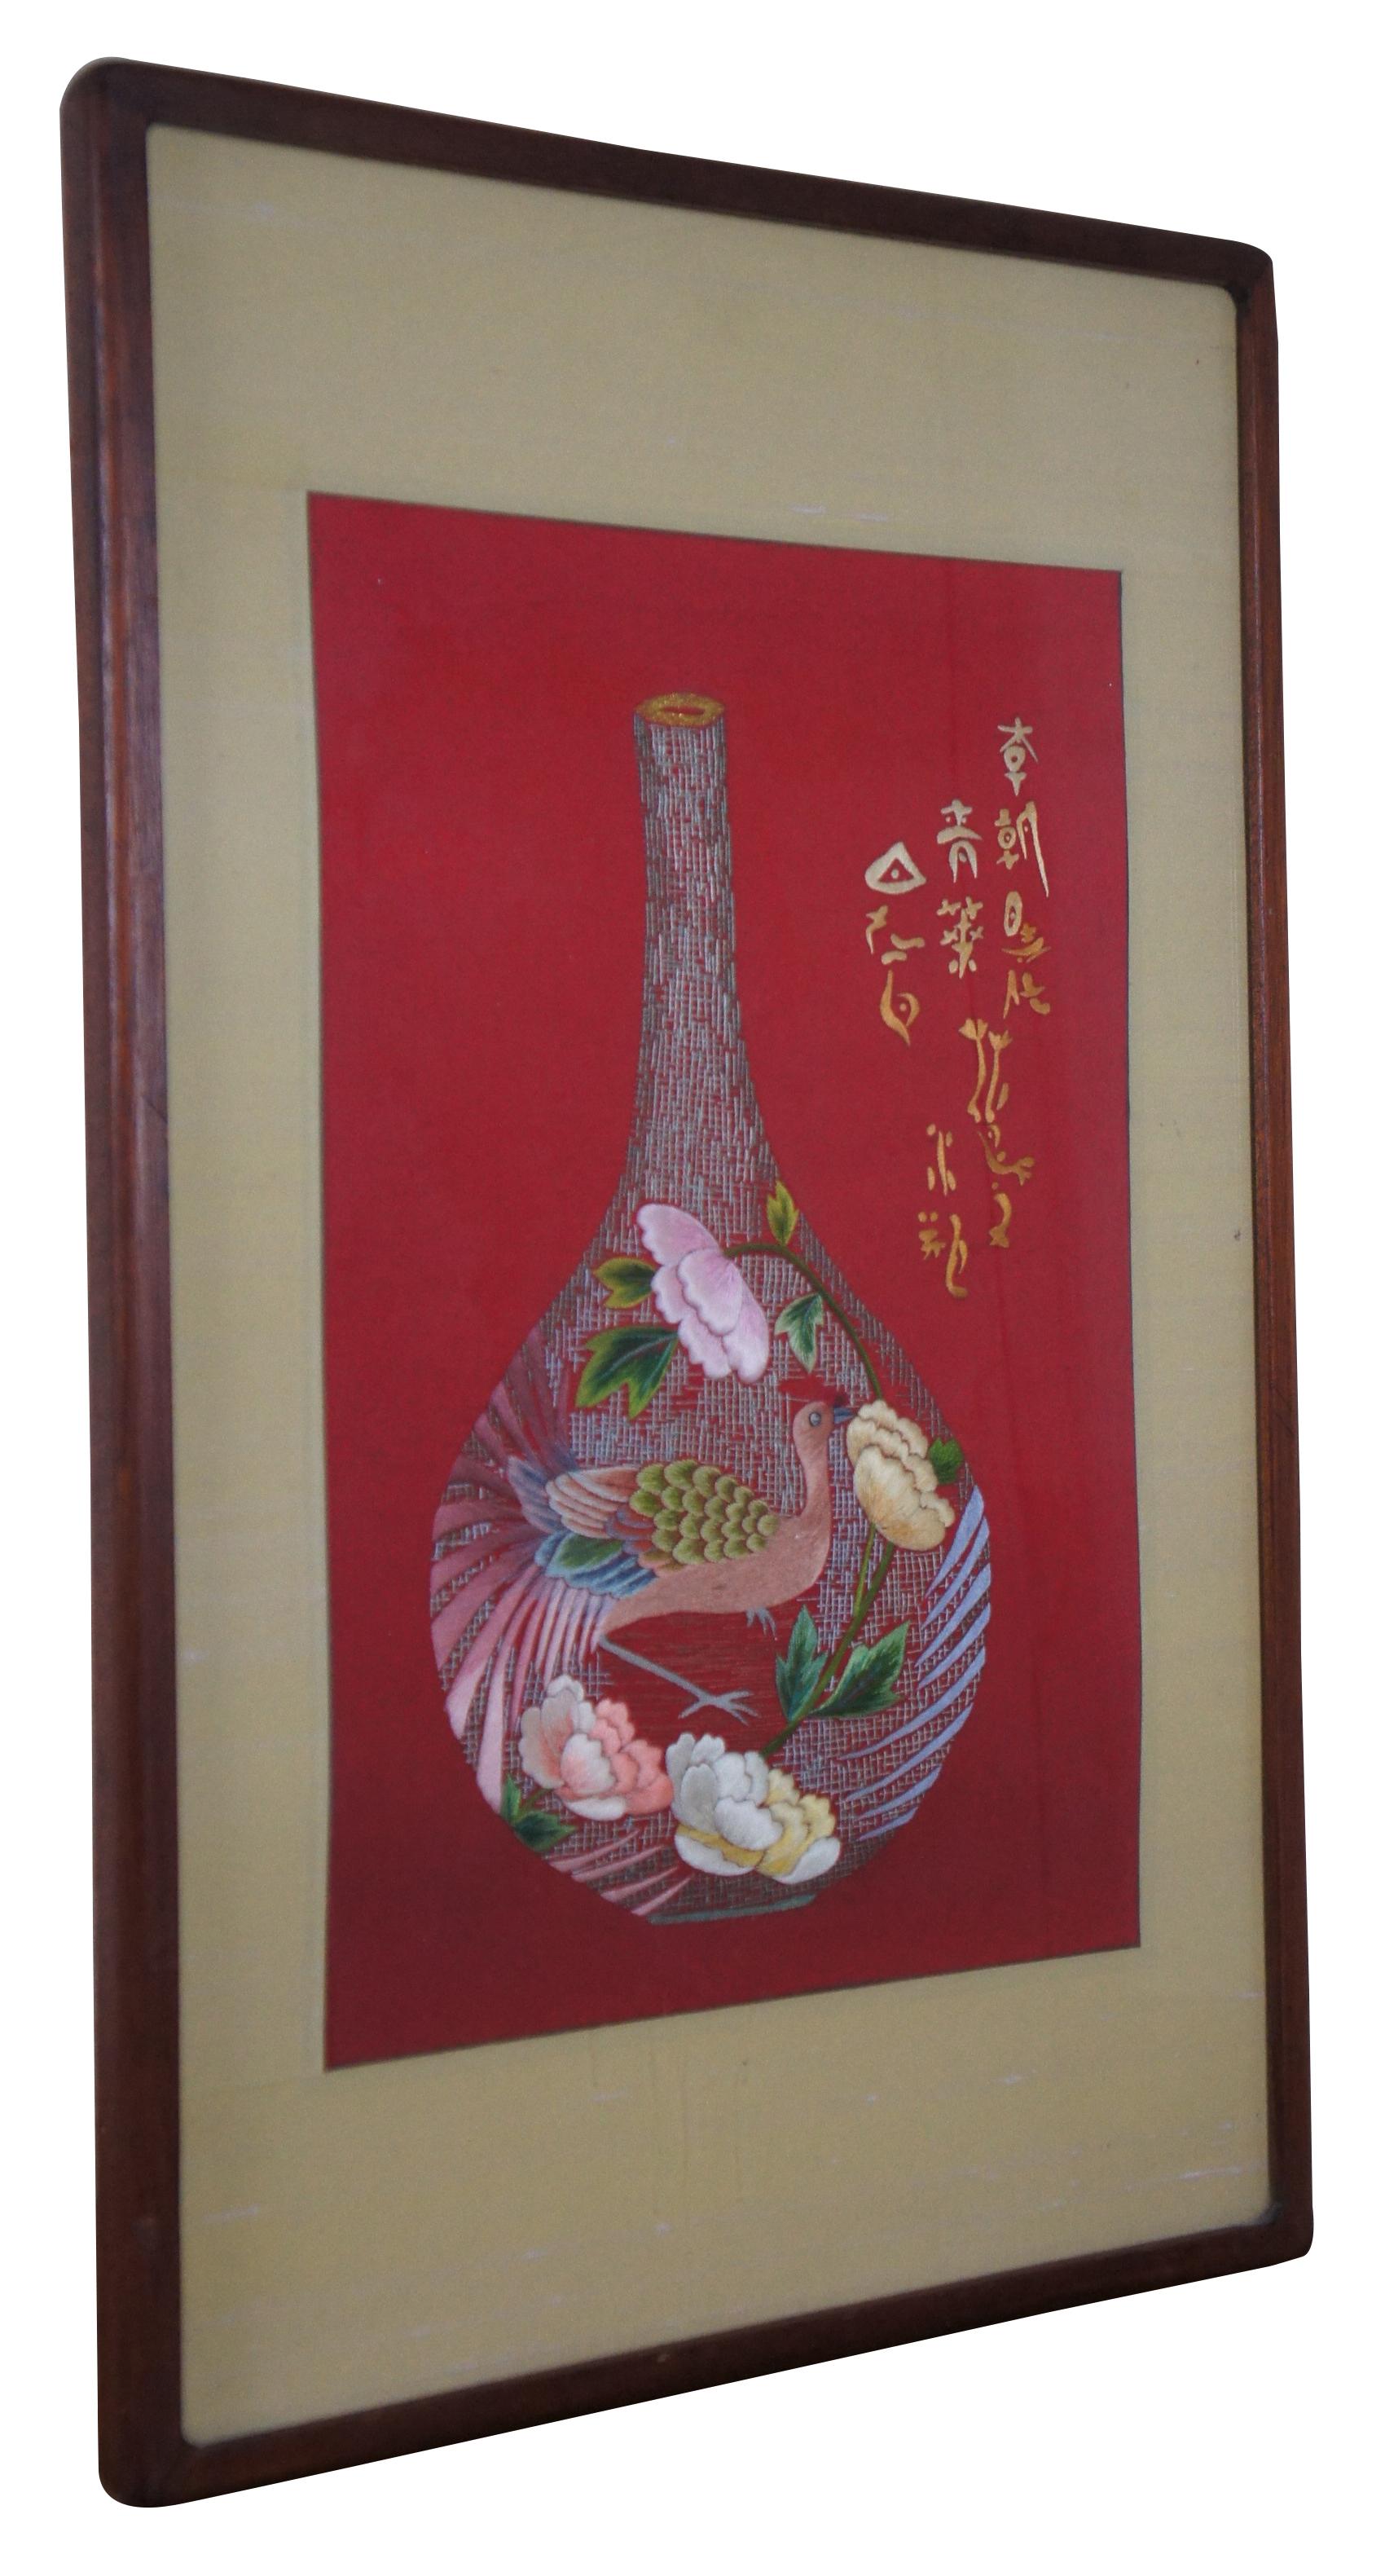 Chinoiserie Antique Joseon Dynasty Embroidered Silk Textile Floral Bird Vase Calligraphy 31